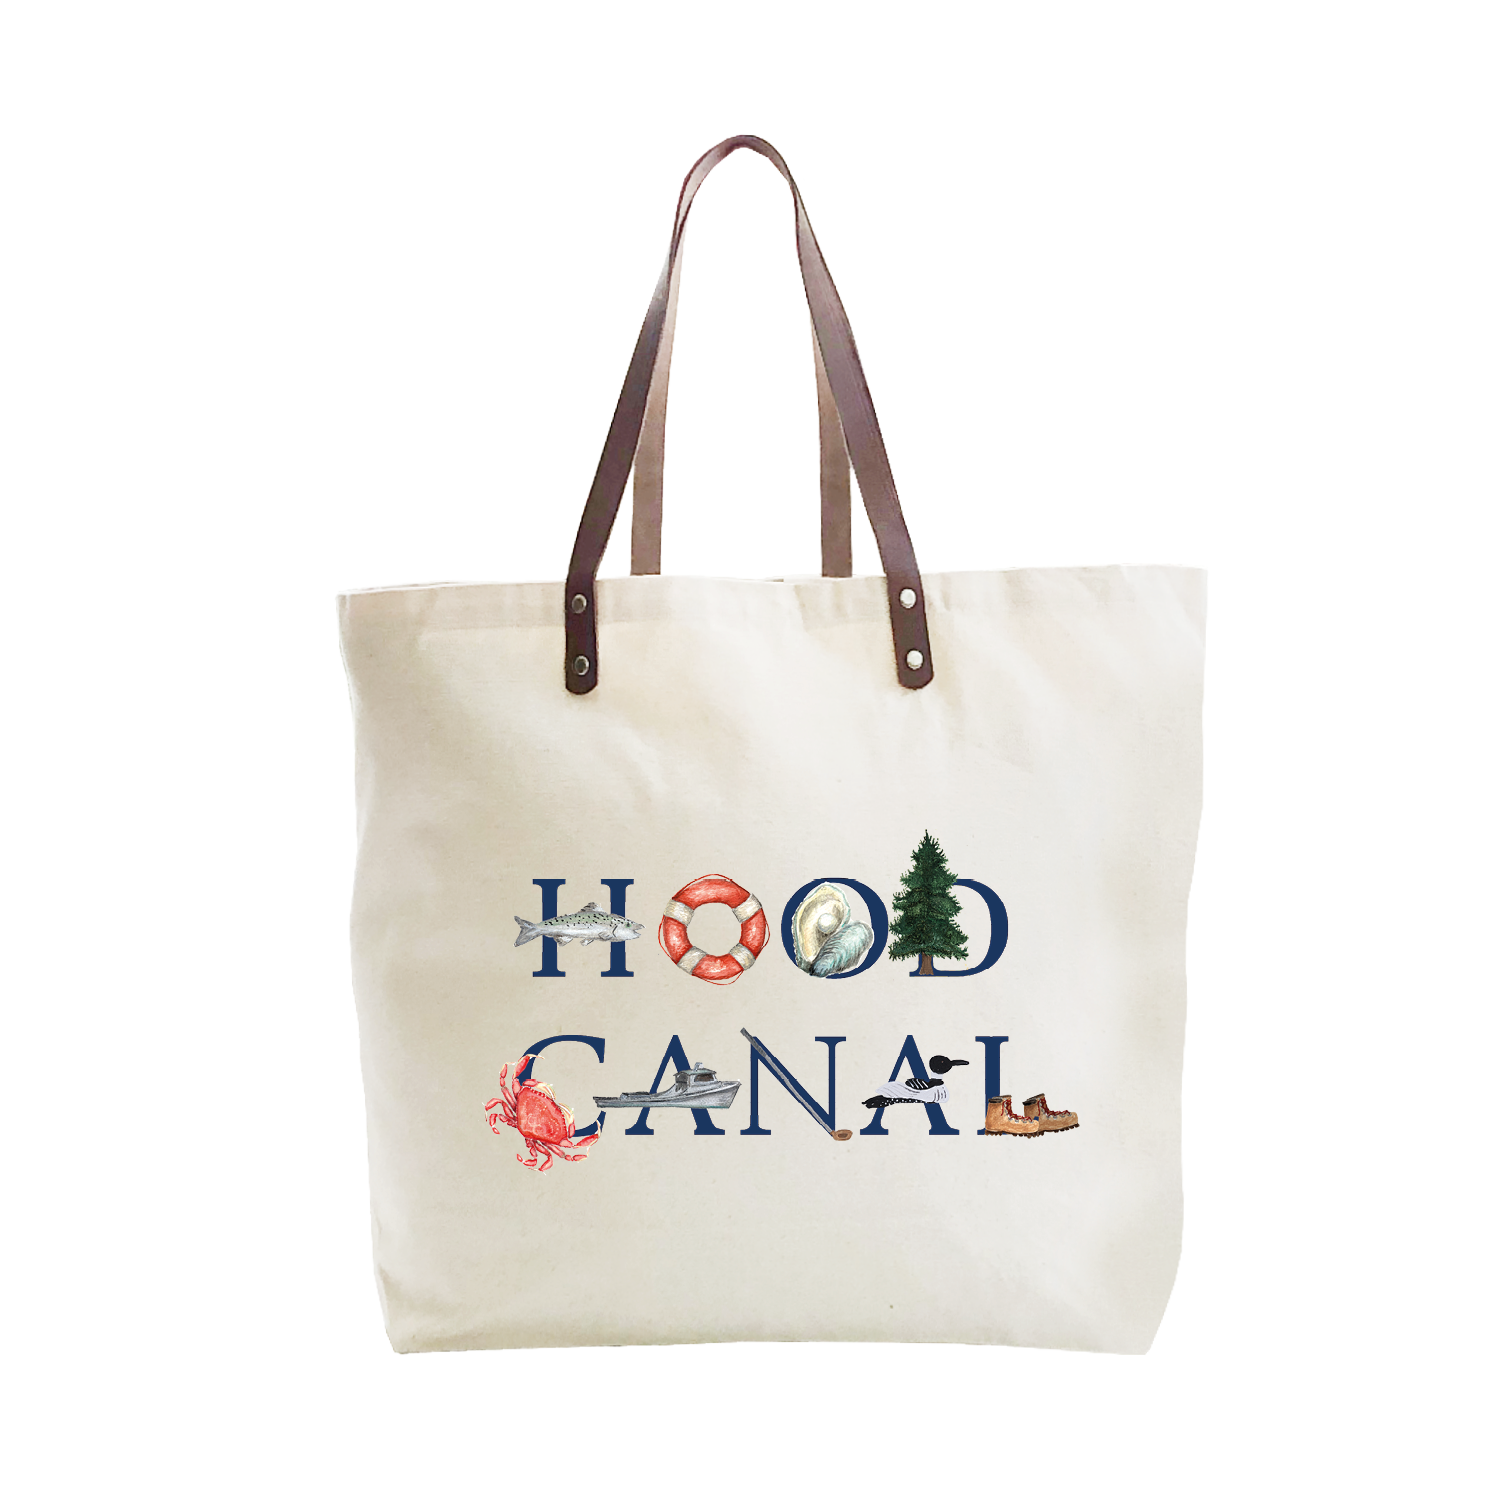 hood canal large tote